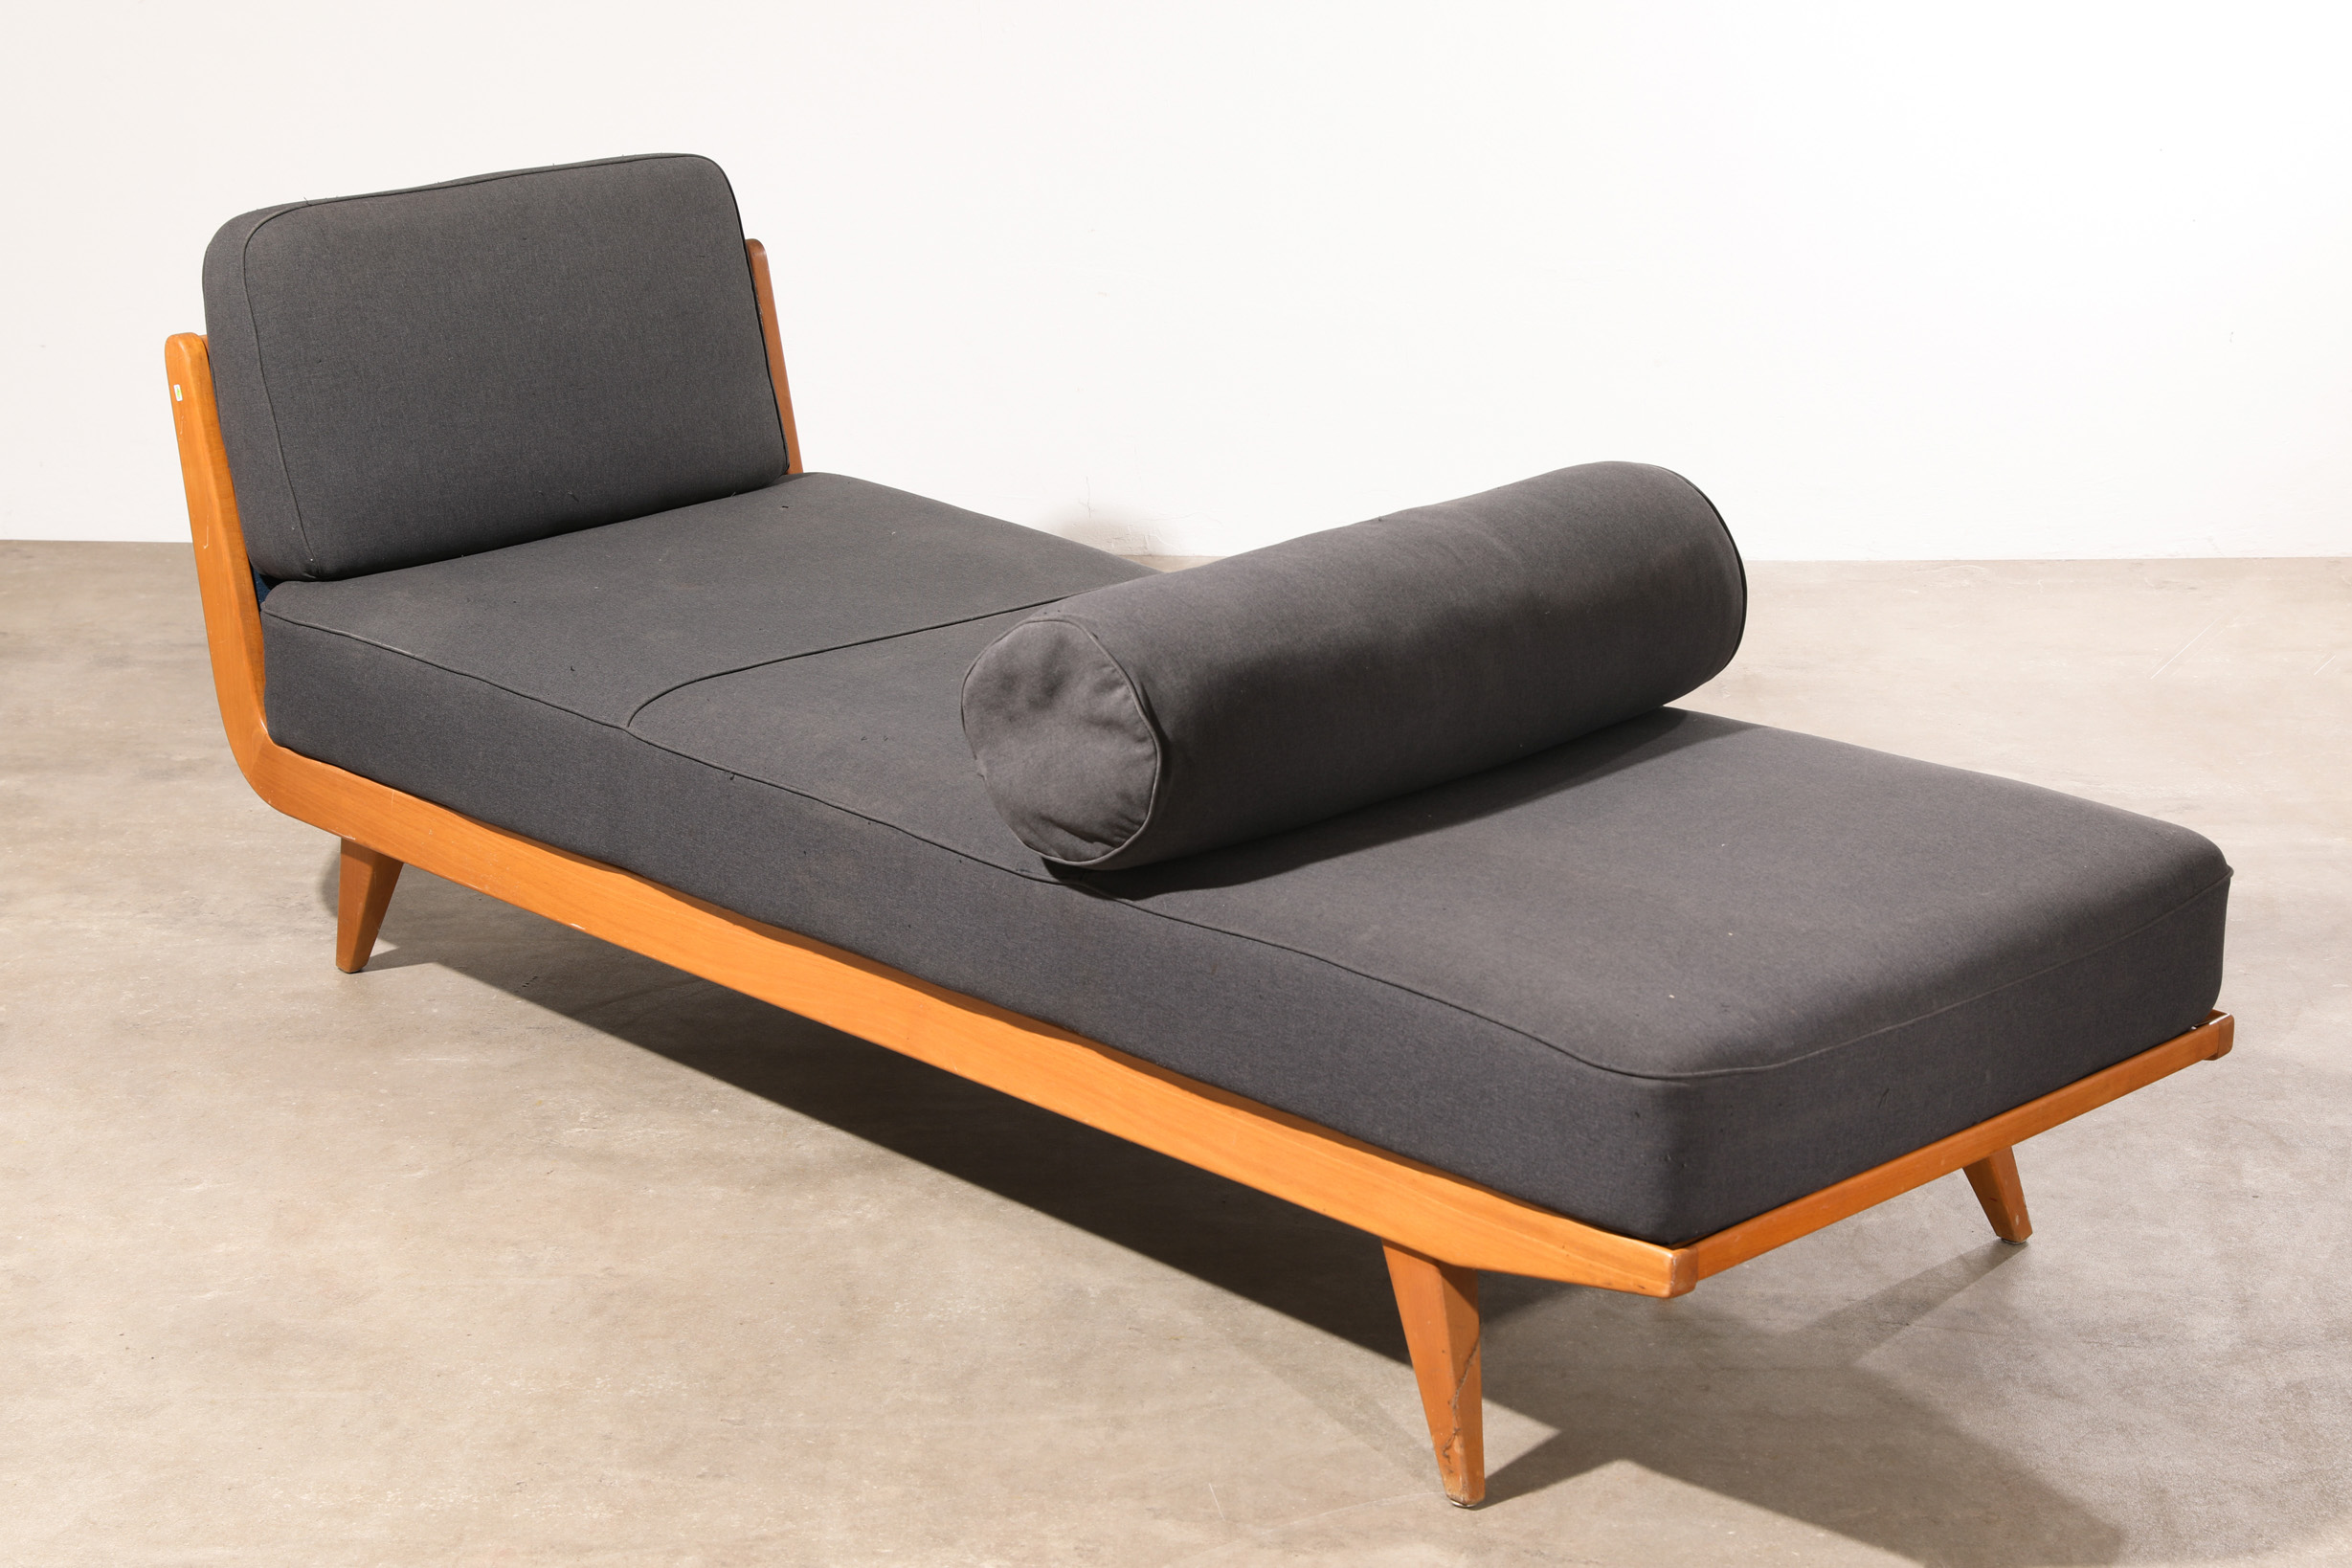 A. K. Schneider, Walter Knoll, Chaiselongue / Daybed, Model Vostra - Image 3 of 7